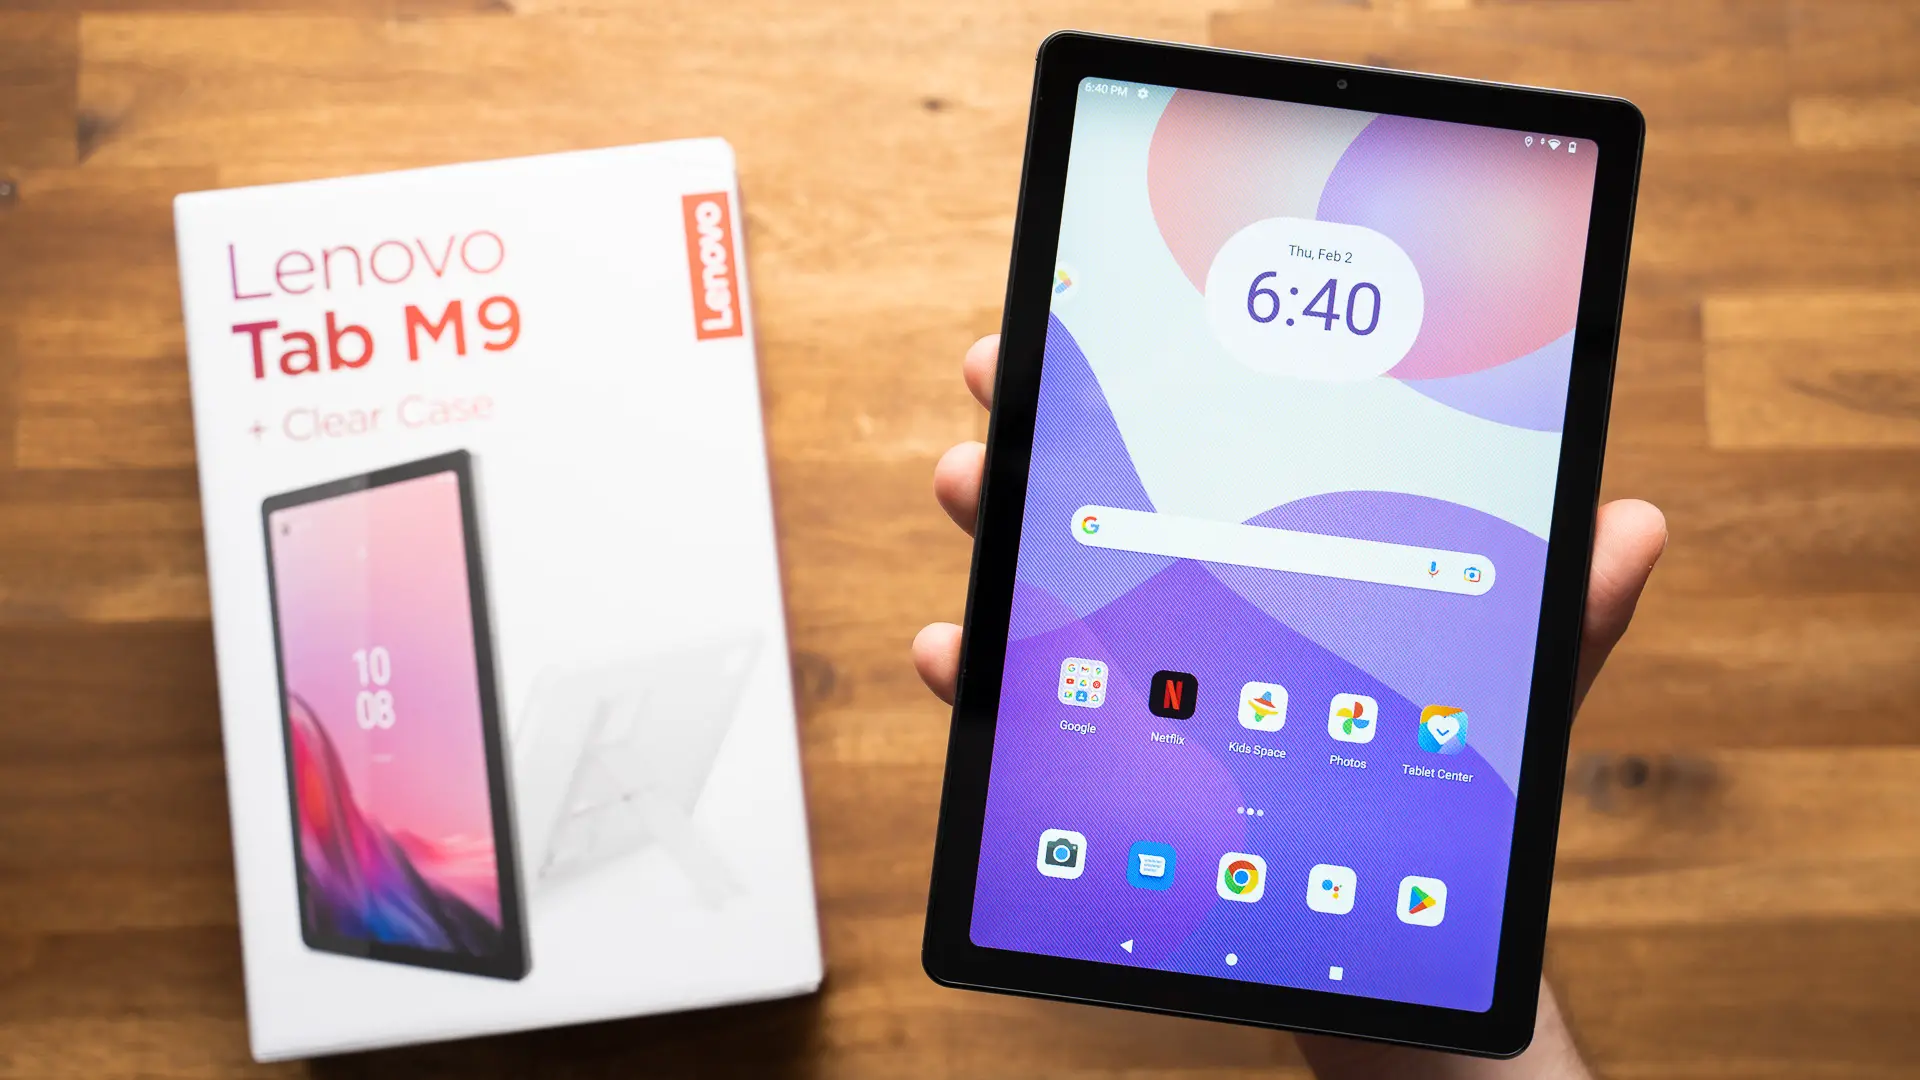 Lenovo Tab M9 Launched In India: Price, Specifications - Cashify